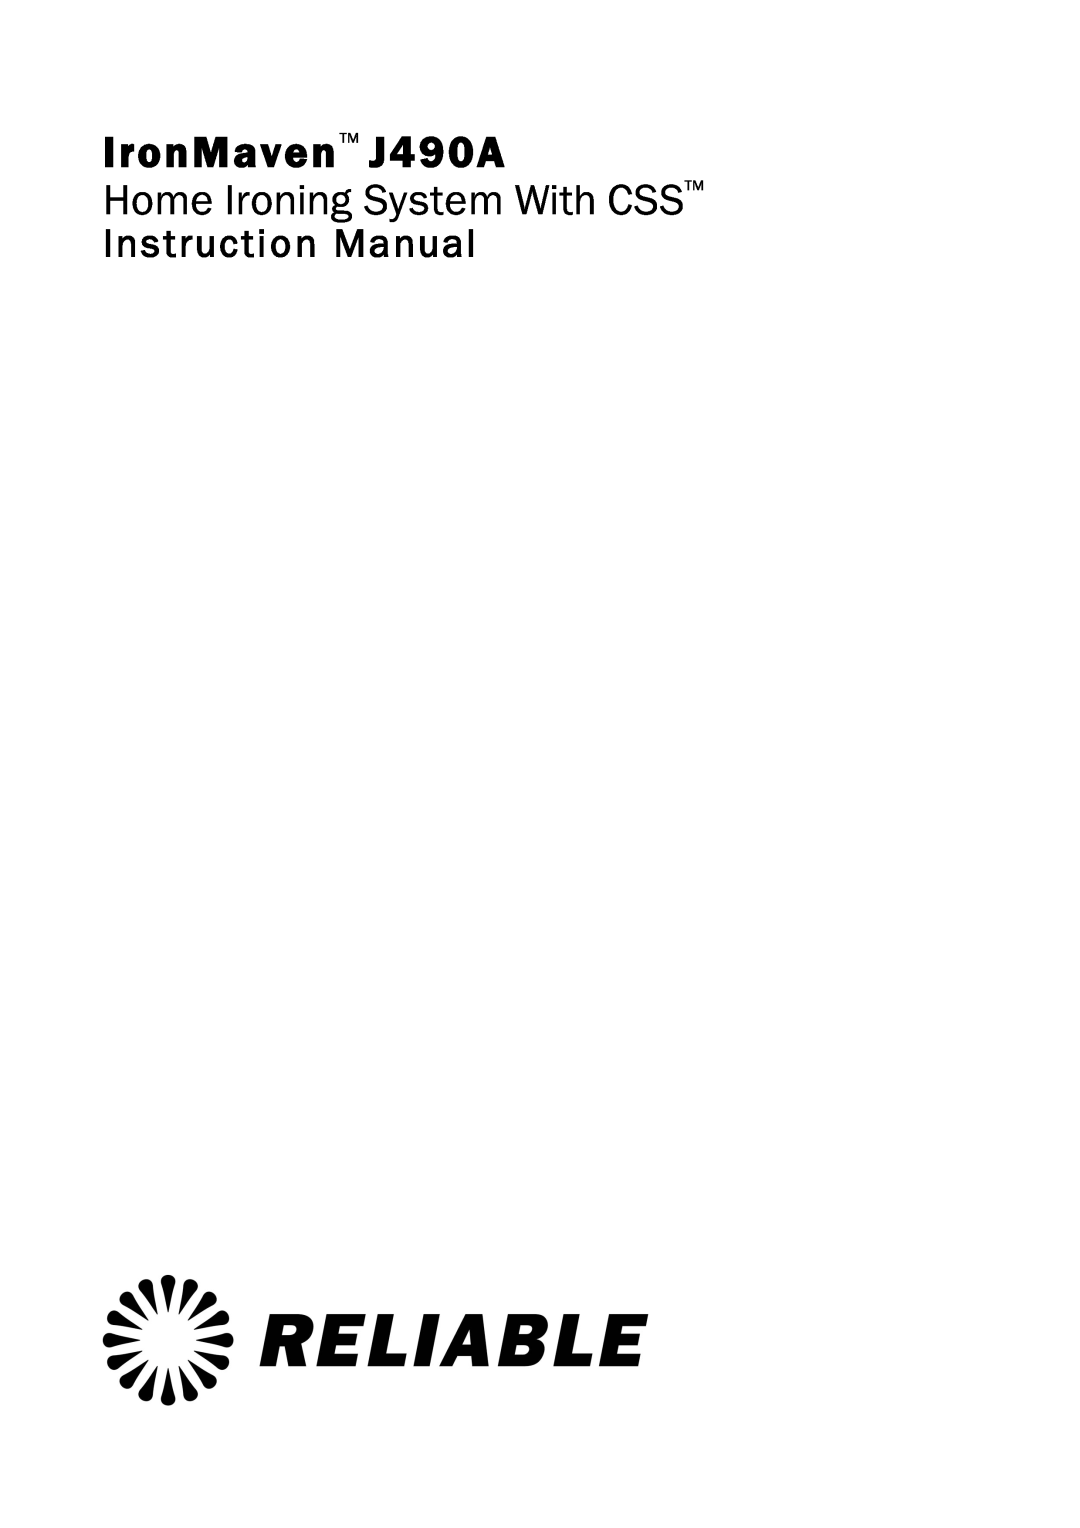 Reliable instruction manual IronMaven J490A, Home Ironing System With CSS, Instruction Manual 